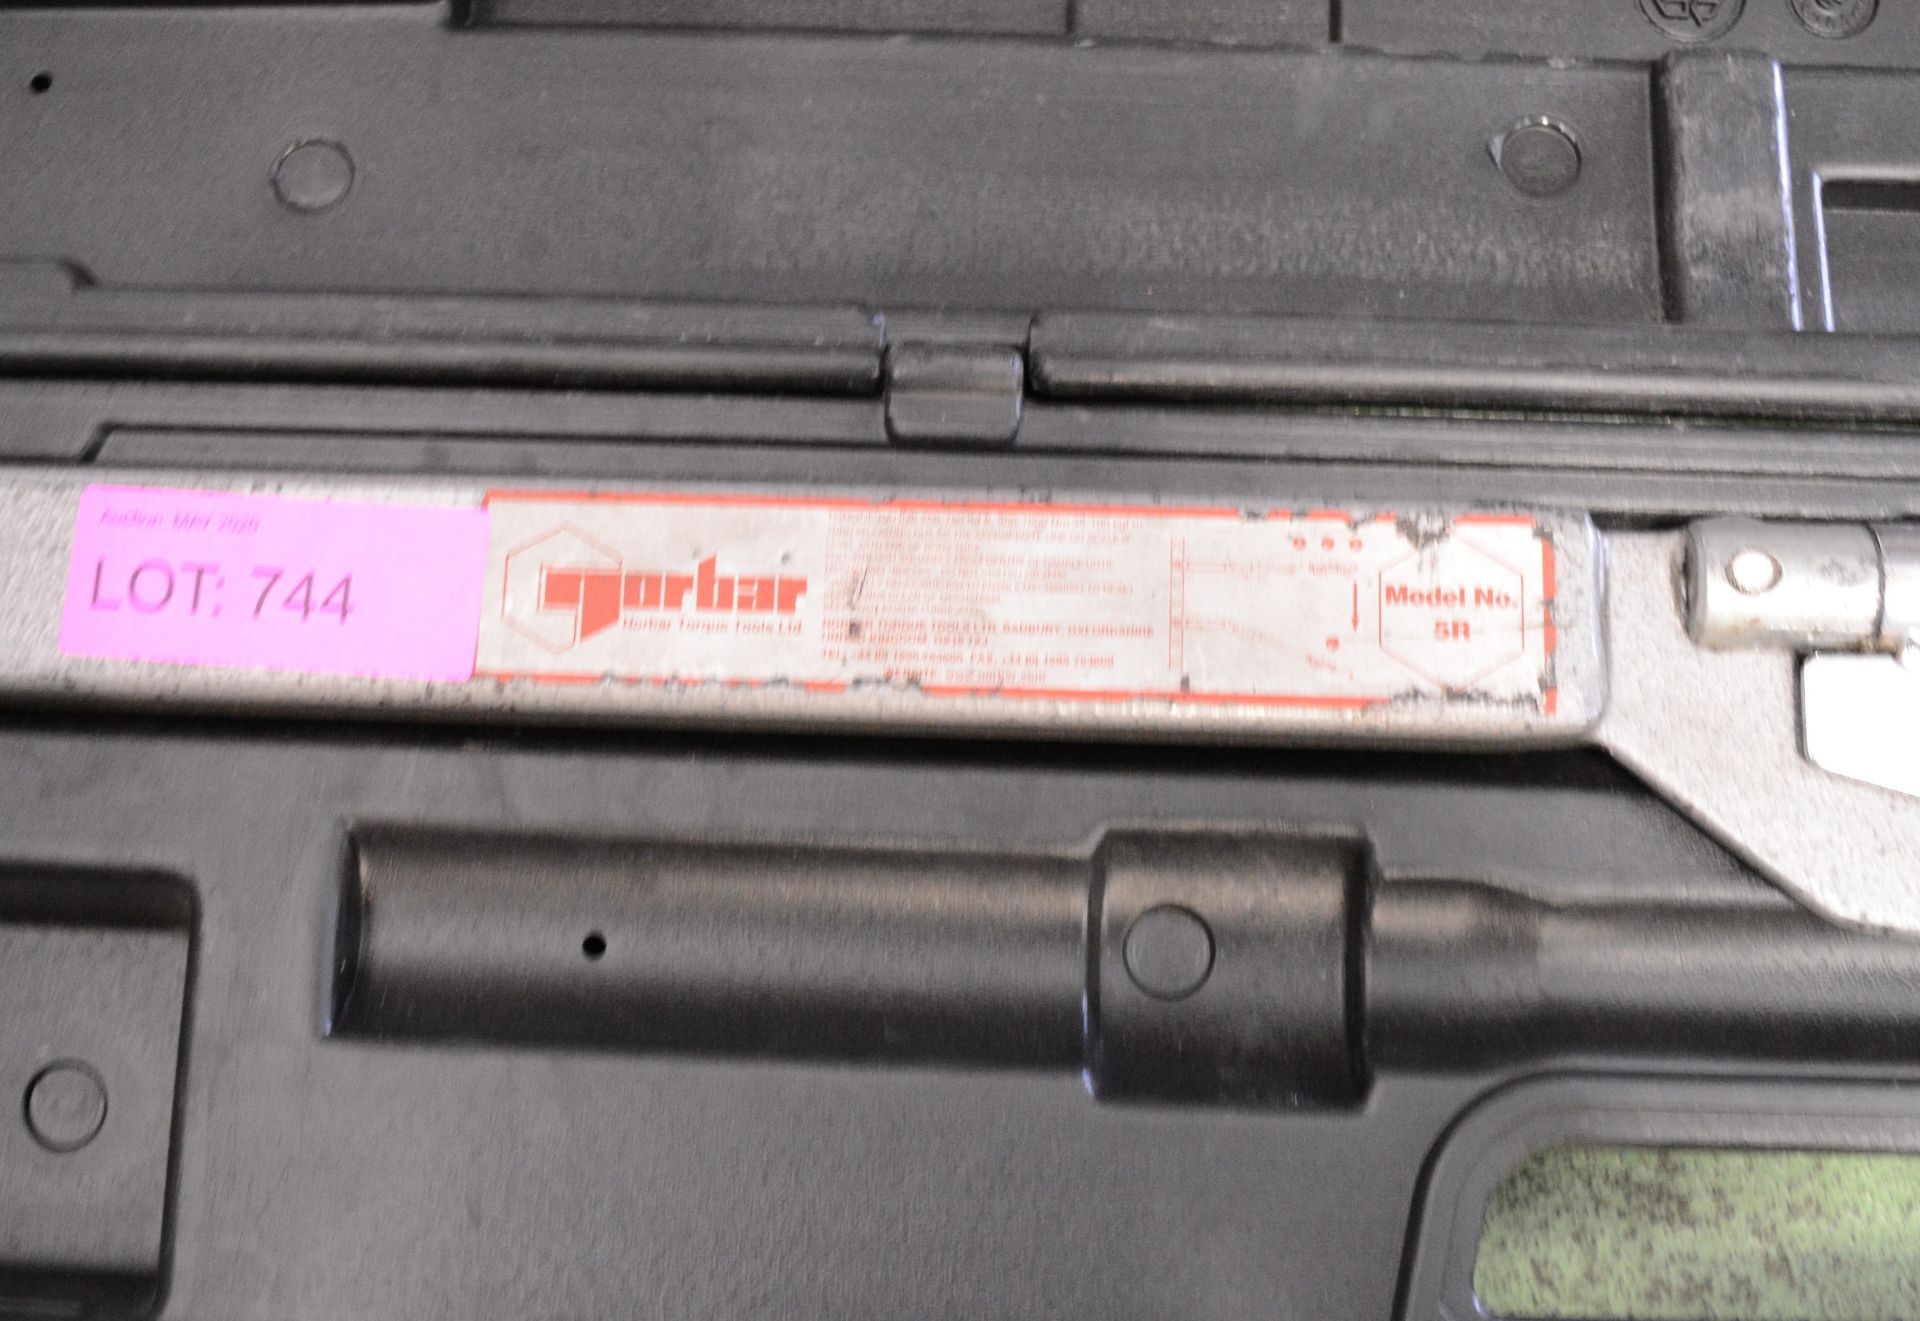 Norbar 5R Torque Wrench 300-1000Nm 200-750 lbf ft 3/4" Square Drive. - Image 2 of 2